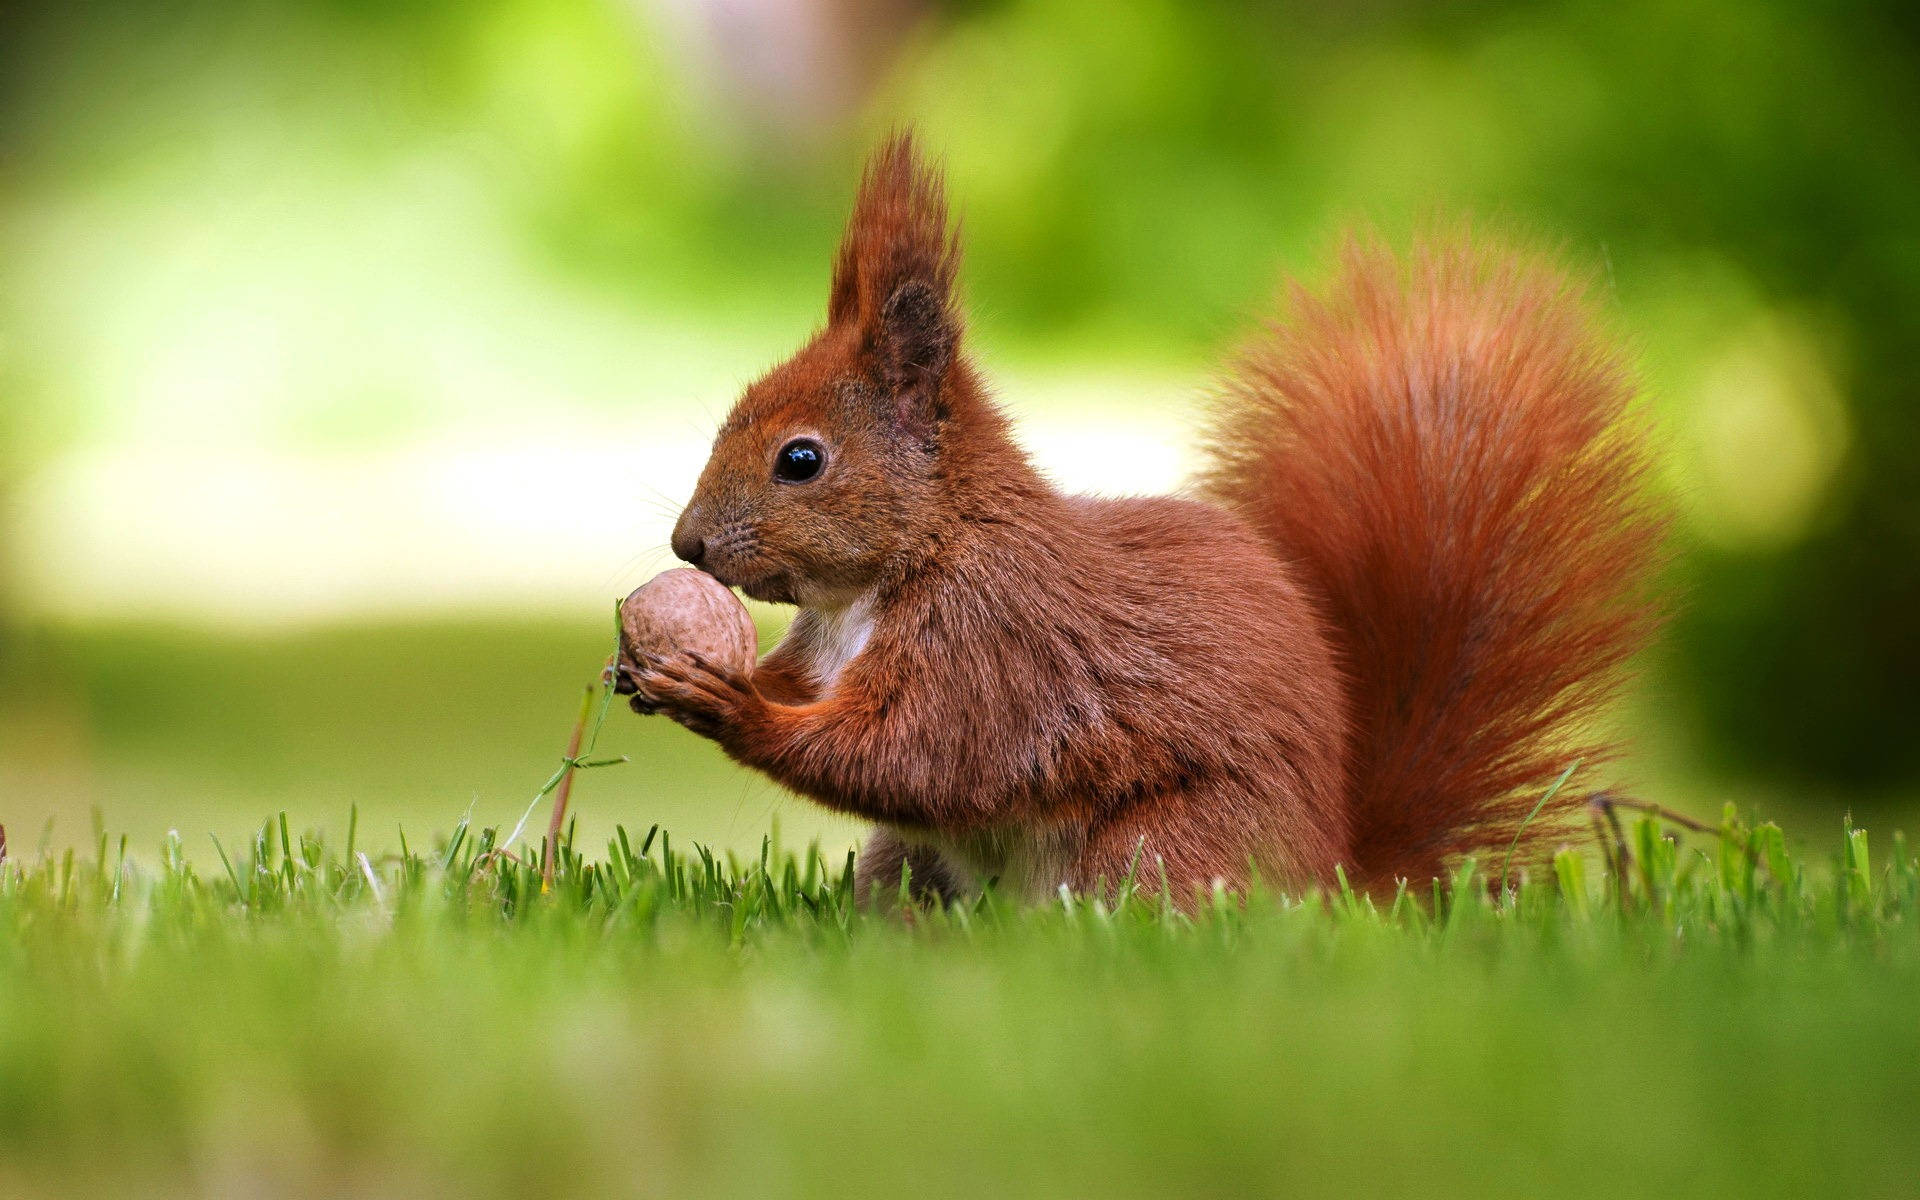 Squirrel Eating In Grass Wallpaper